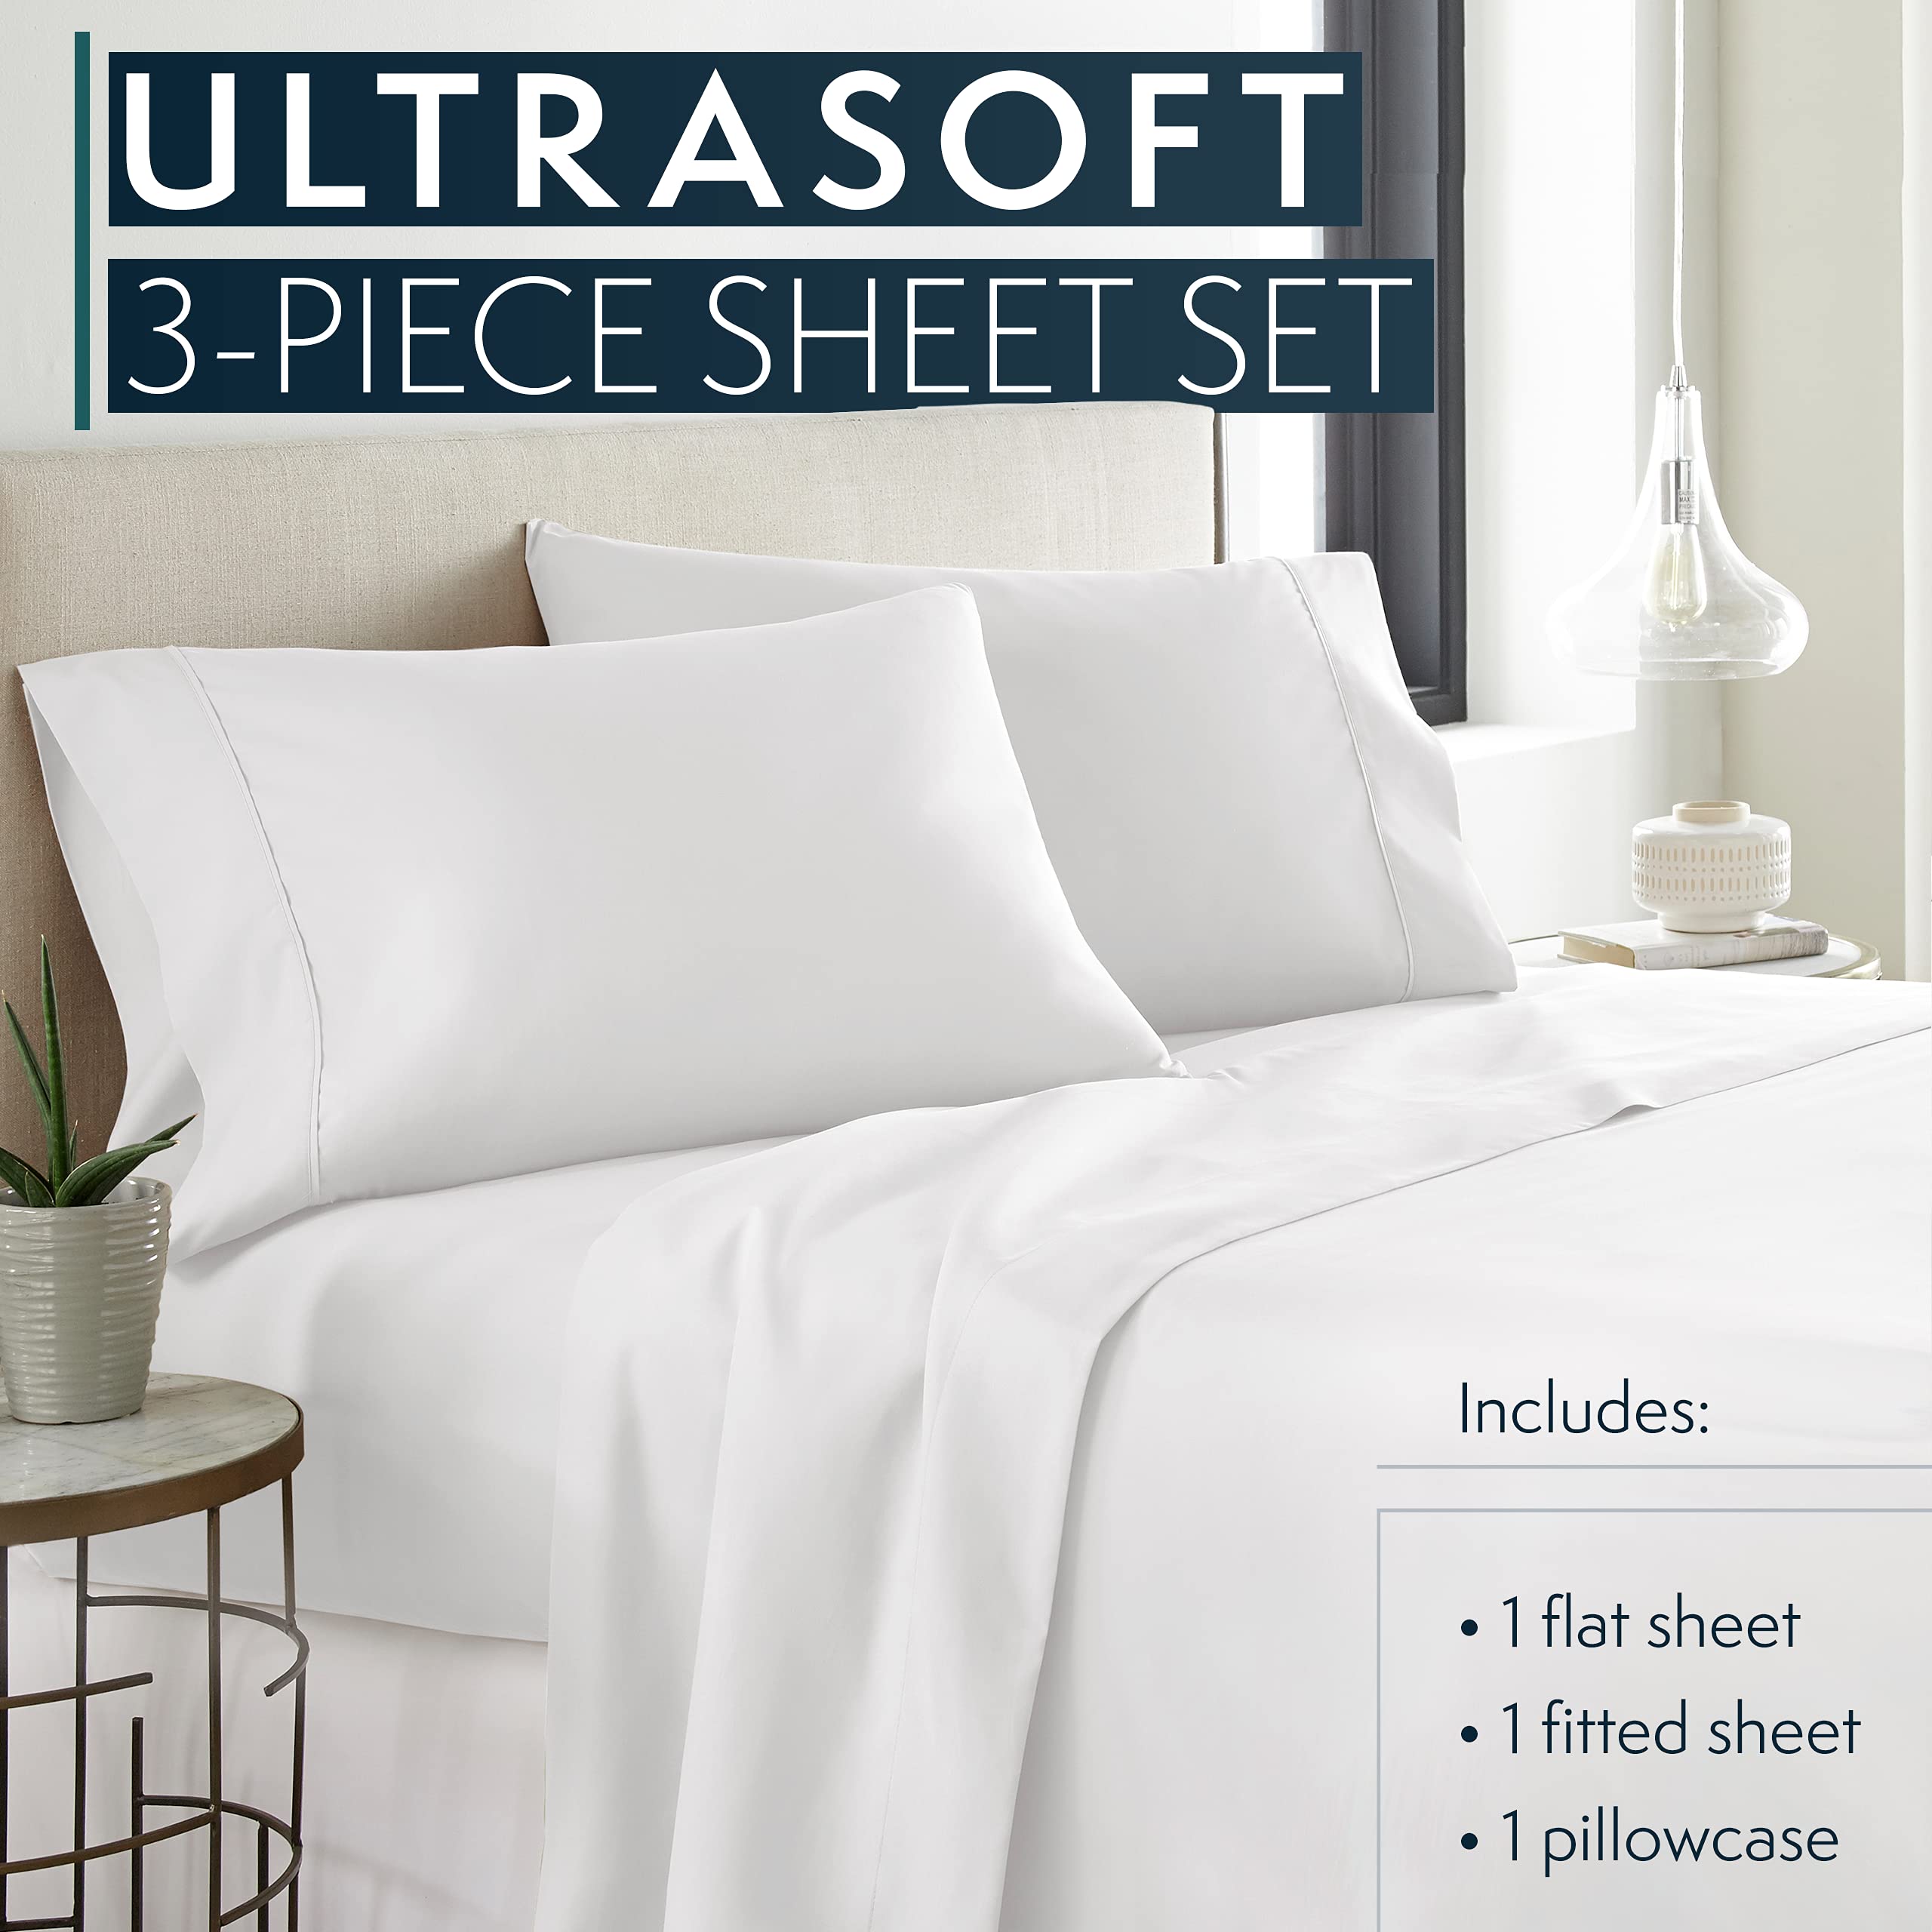 4 Piece Bedding Sheet & Pillowcases Sets-Fade Resistant & Machine Washable